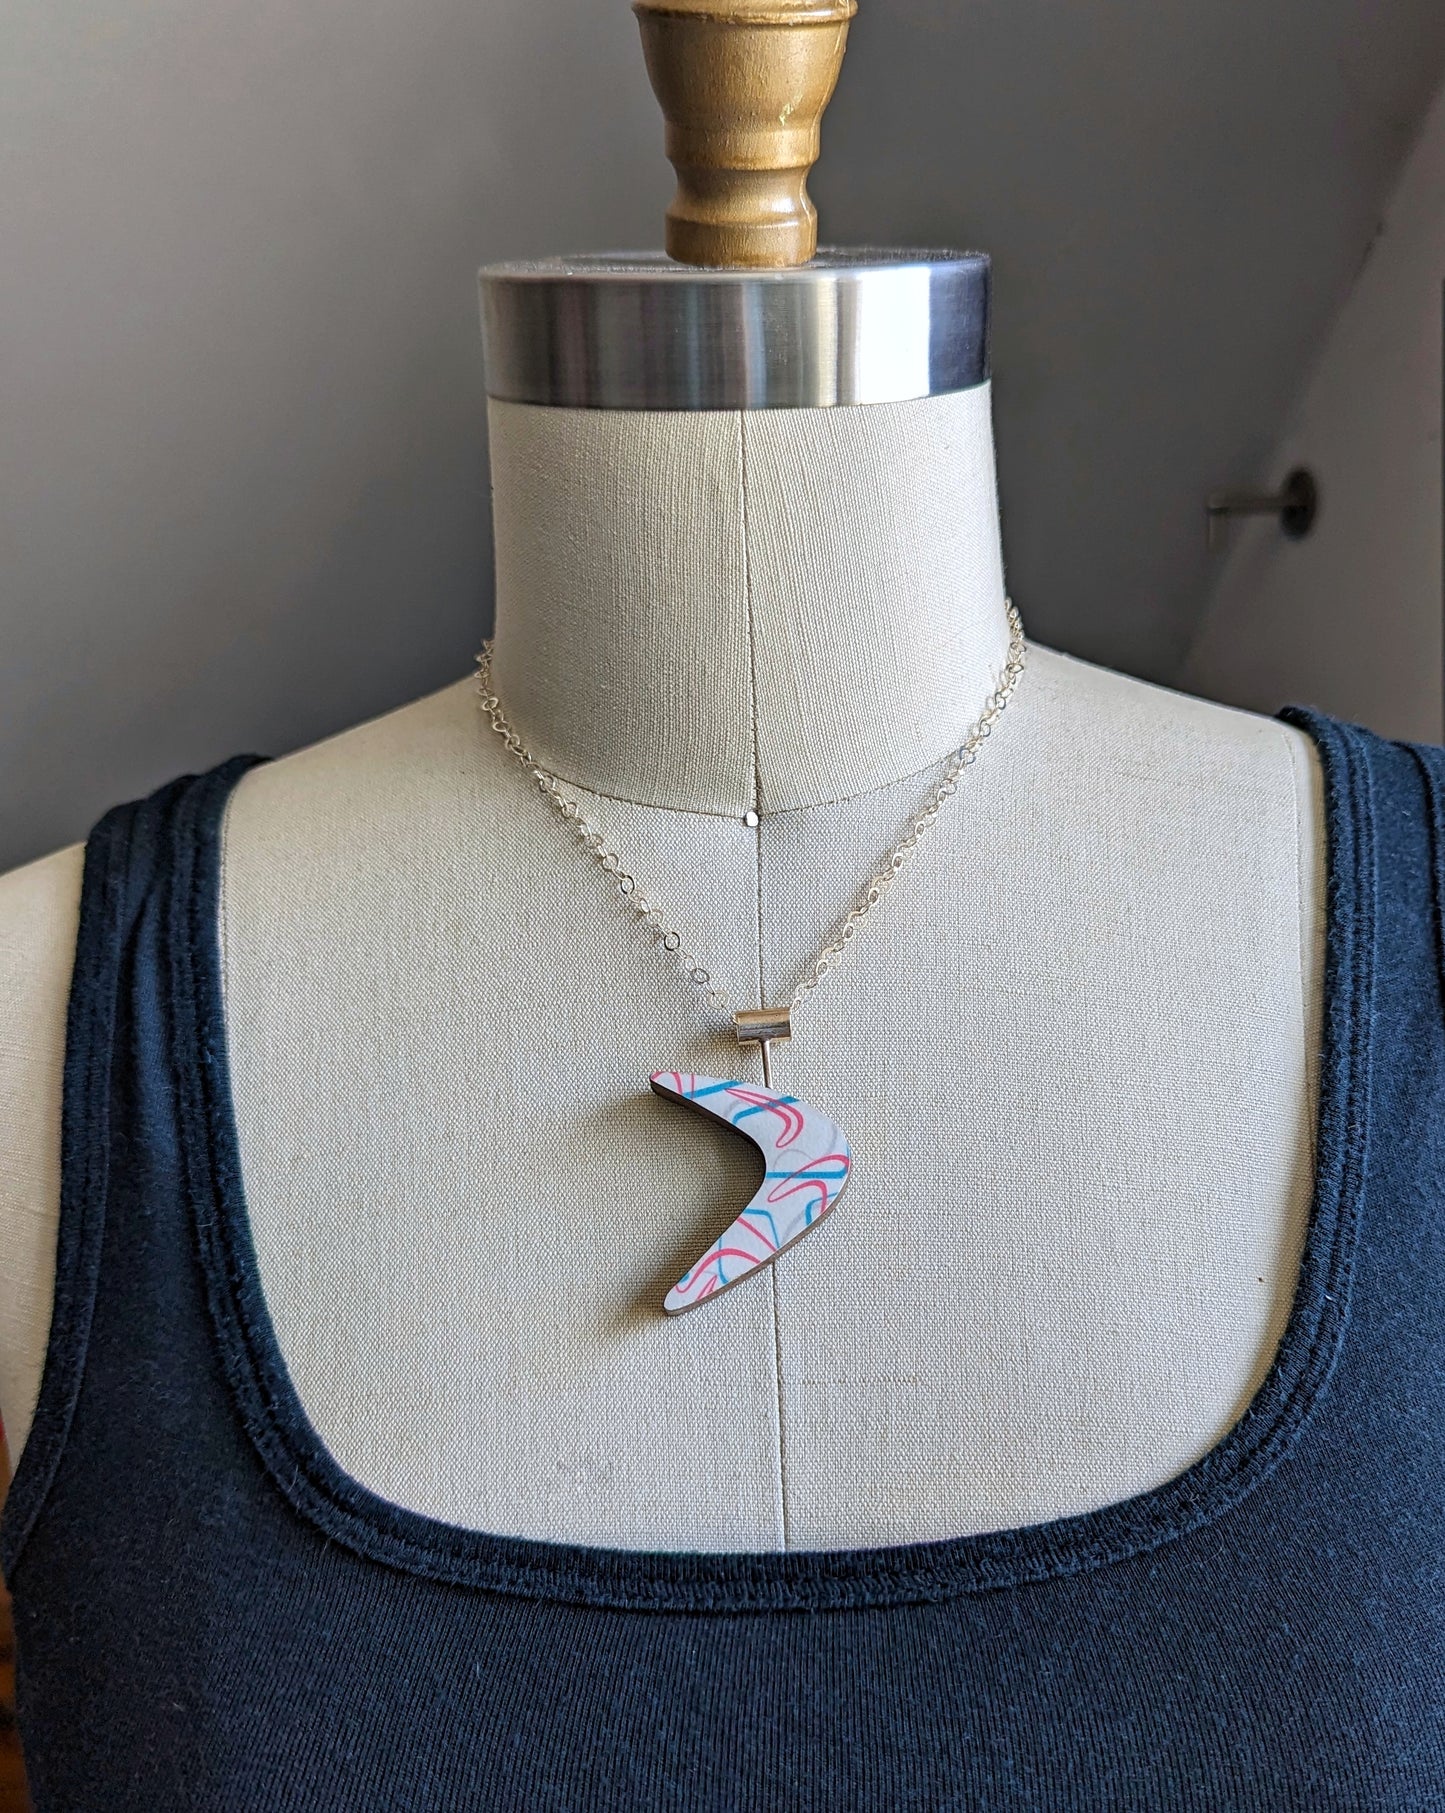 Boomerang shaped laminate on wood necklace on dress form to show how it looks on